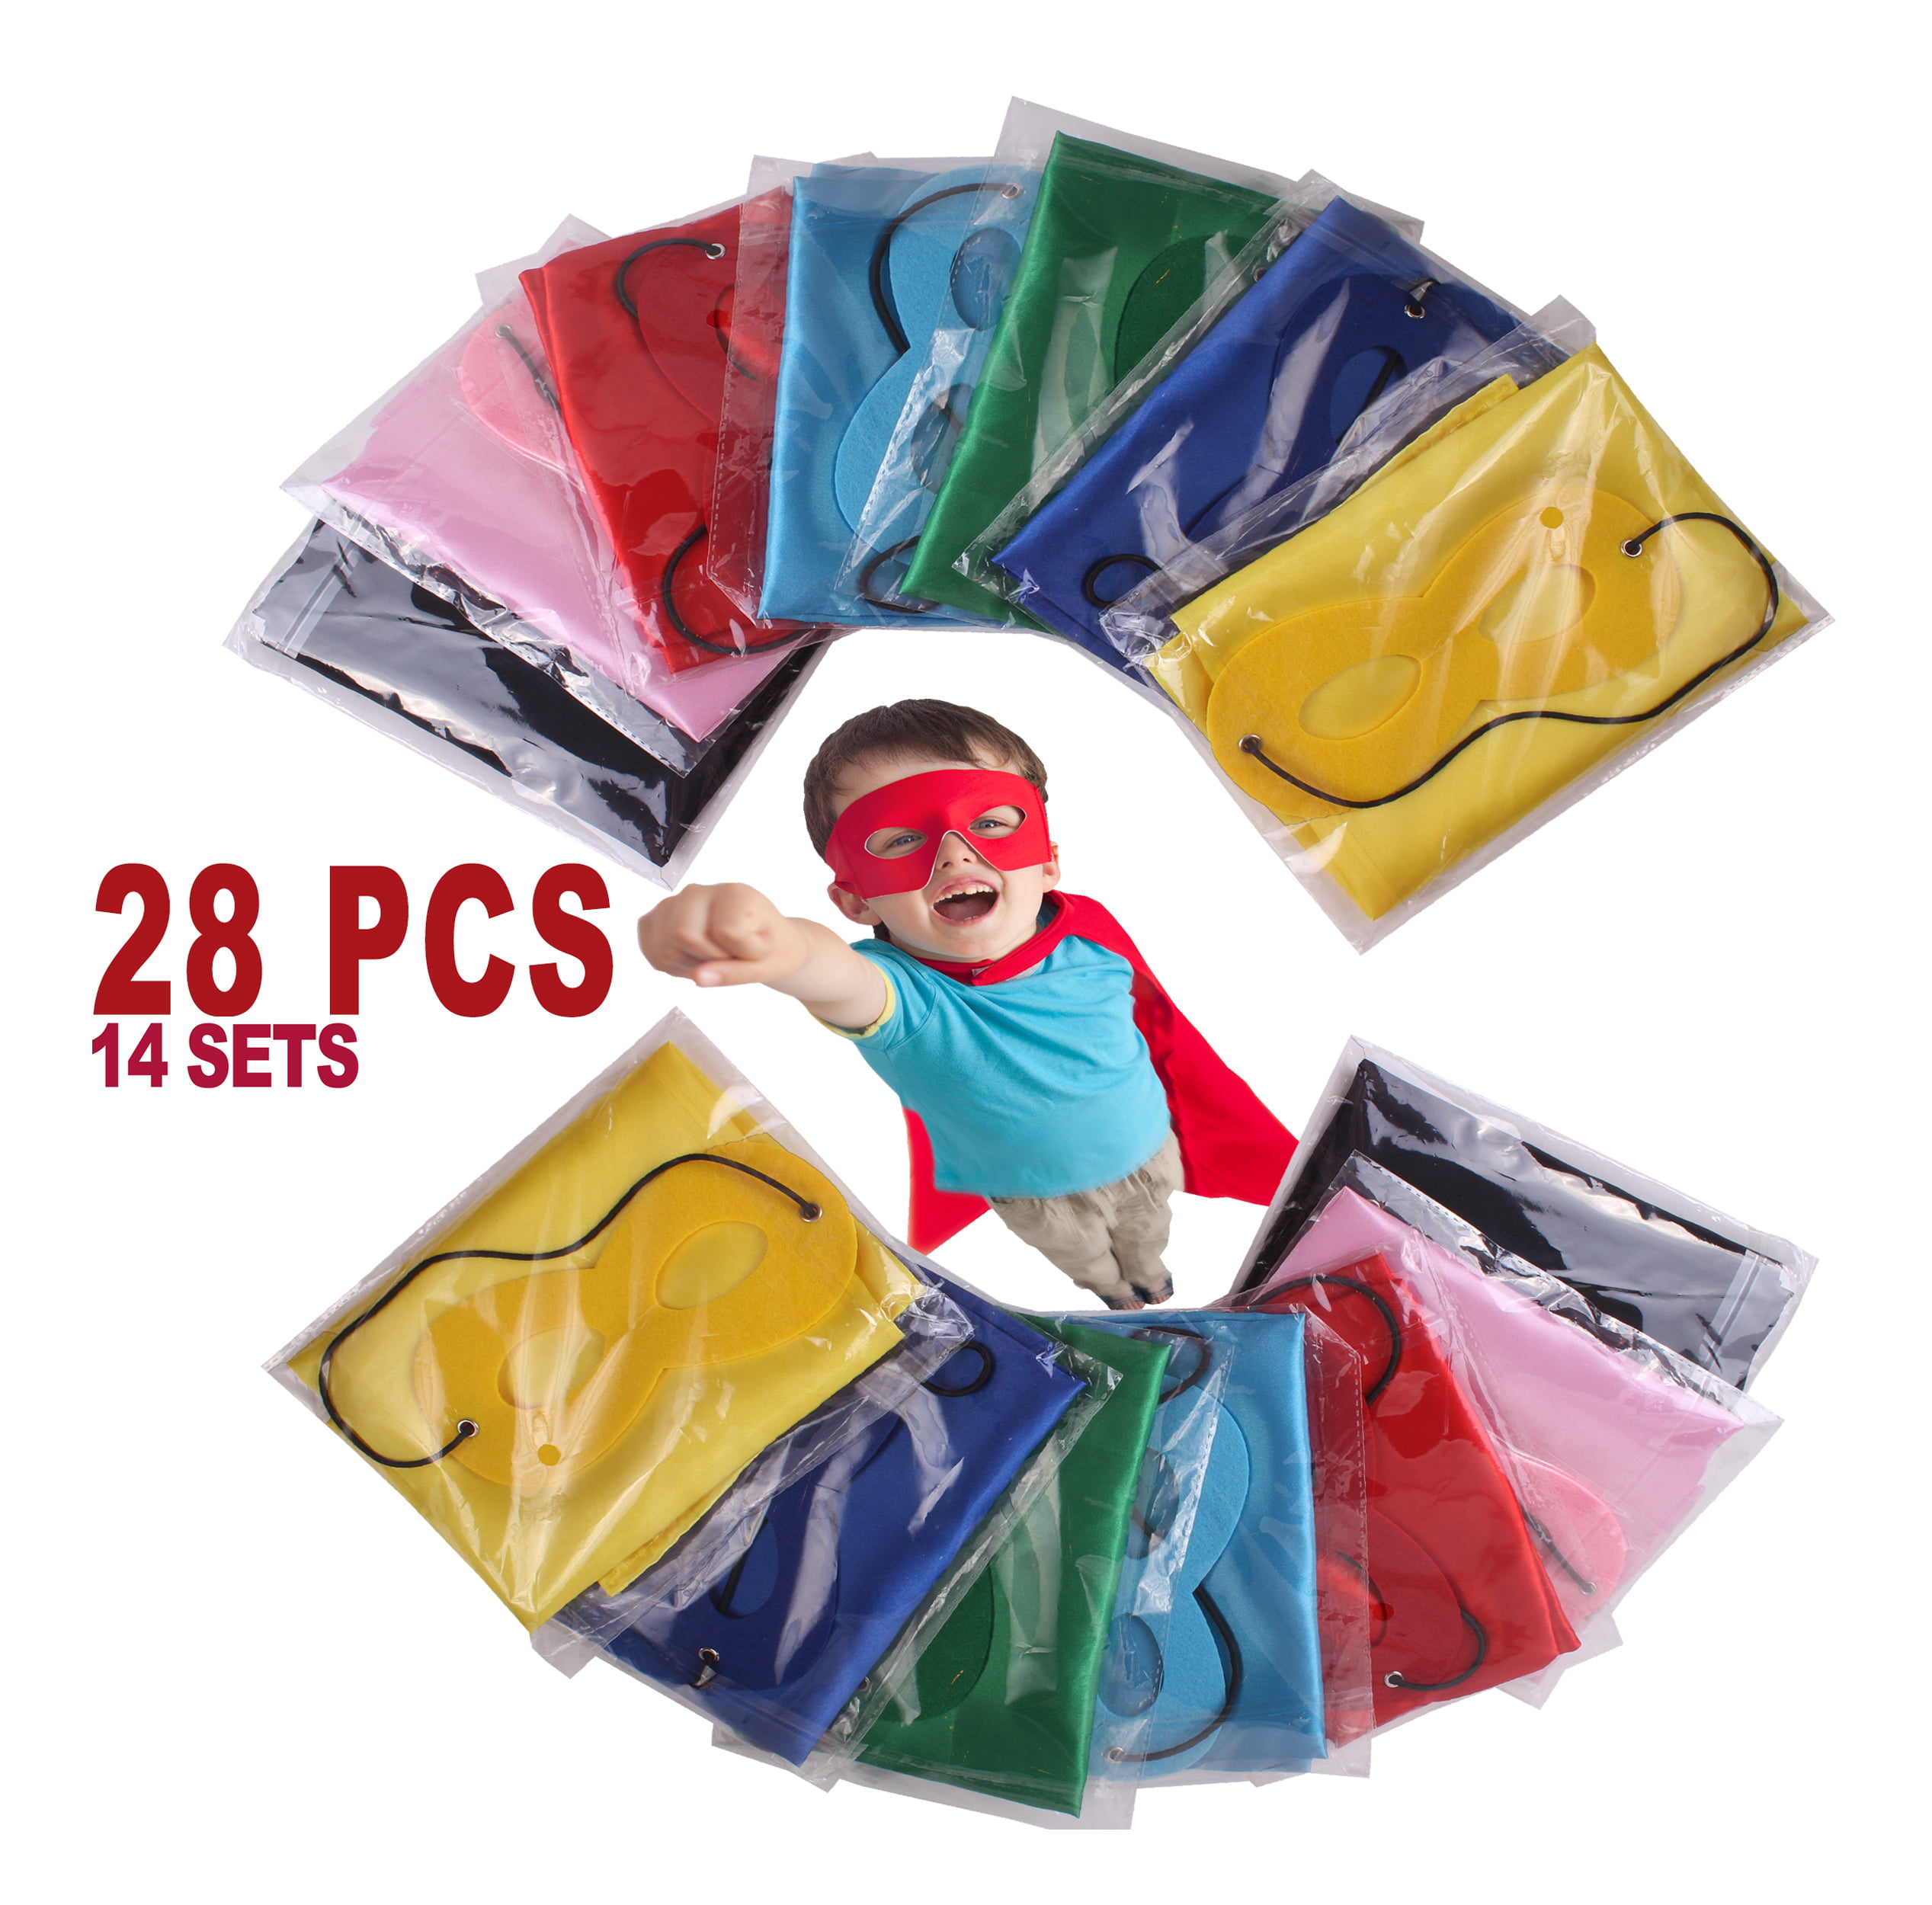 ADJOY Superhero Capes and Masks for Kids Birthday Party 7 Sets DIY Dress Up Costumes Bulk Pack 